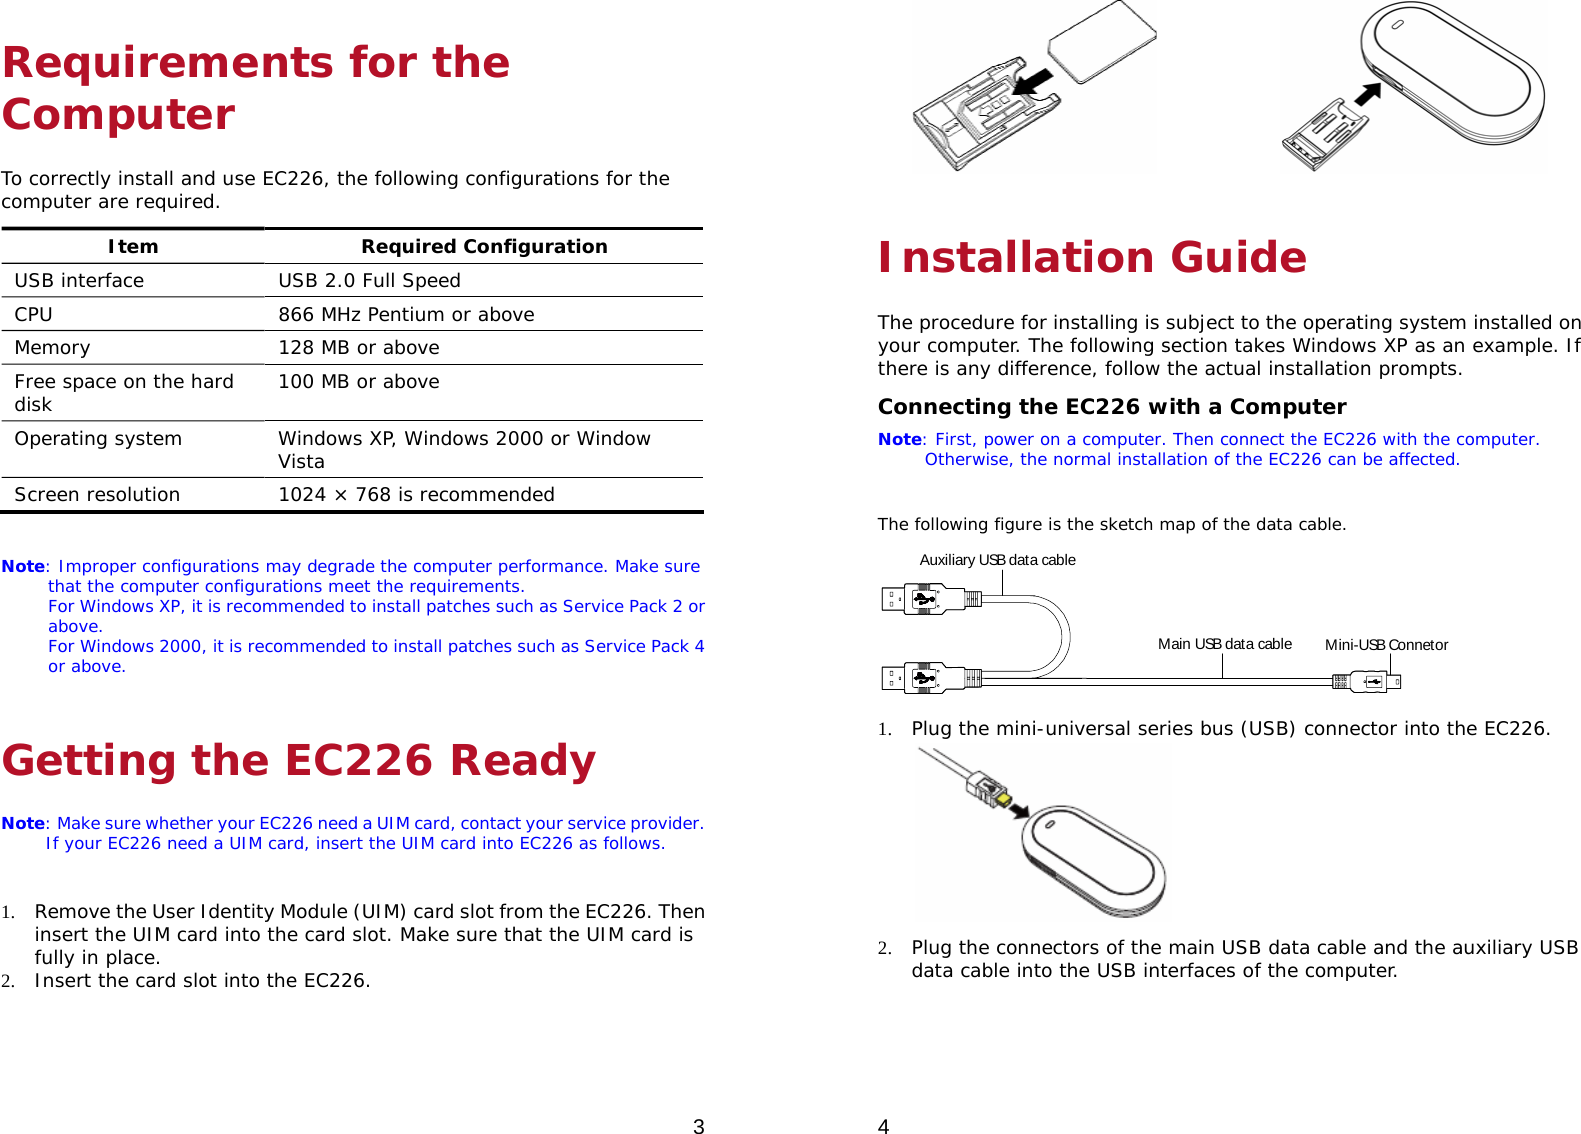  3 Requirements for the Computer To correctly install and use EC226, the following configurations for the computer are required. Item Required Configuration USB interface  USB 2.0 Full Speed CPU  866 MHz Pentium or above Memory  128 MB or above Free space on the hard disk  100 MB or above Operating system  Windows XP, Windows 2000 or Window Vista Screen resolution  1024 × 768 is recommended  Note: Improper configurations may degrade the computer performance. Make sure that the computer configurations meet the requirements. For Windows XP, it is recommended to install patches such as Service Pack 2 or above. For Windows 2000, it is recommended to install patches such as Service Pack 4 or above. Getting the EC226 Ready Note: Make sure whether your EC226 need a UIM card, contact your service provider. If your EC226 need a UIM card, insert the UIM card into EC226 as follows.   1. Remove the User Identity Module (UIM) card slot from the EC226. Then insert the UIM card into the card slot. Make sure that the UIM card is fully in place. 2. Insert the card slot into the EC226. 4                Installation Guide The procedure for installing is subject to the operating system installed on your computer. The following section takes Windows XP as an example. If there is any difference, follow the actual installation prompts. Connecting the EC226 with a Computer Note: First, power on a computer. Then connect the EC226 with the computer. Otherwise, the normal installation of the EC226 can be affected.  The following figure is the sketch map of the data cable. Auxiliary USB data cableMain USB data cable Mini-USB Connetor 1. Plug the mini-universal series bus (USB) connector into the EC226.  2. Plug the connectors of the main USB data cable and the auxiliary USB data cable into the USB interfaces of the computer. 